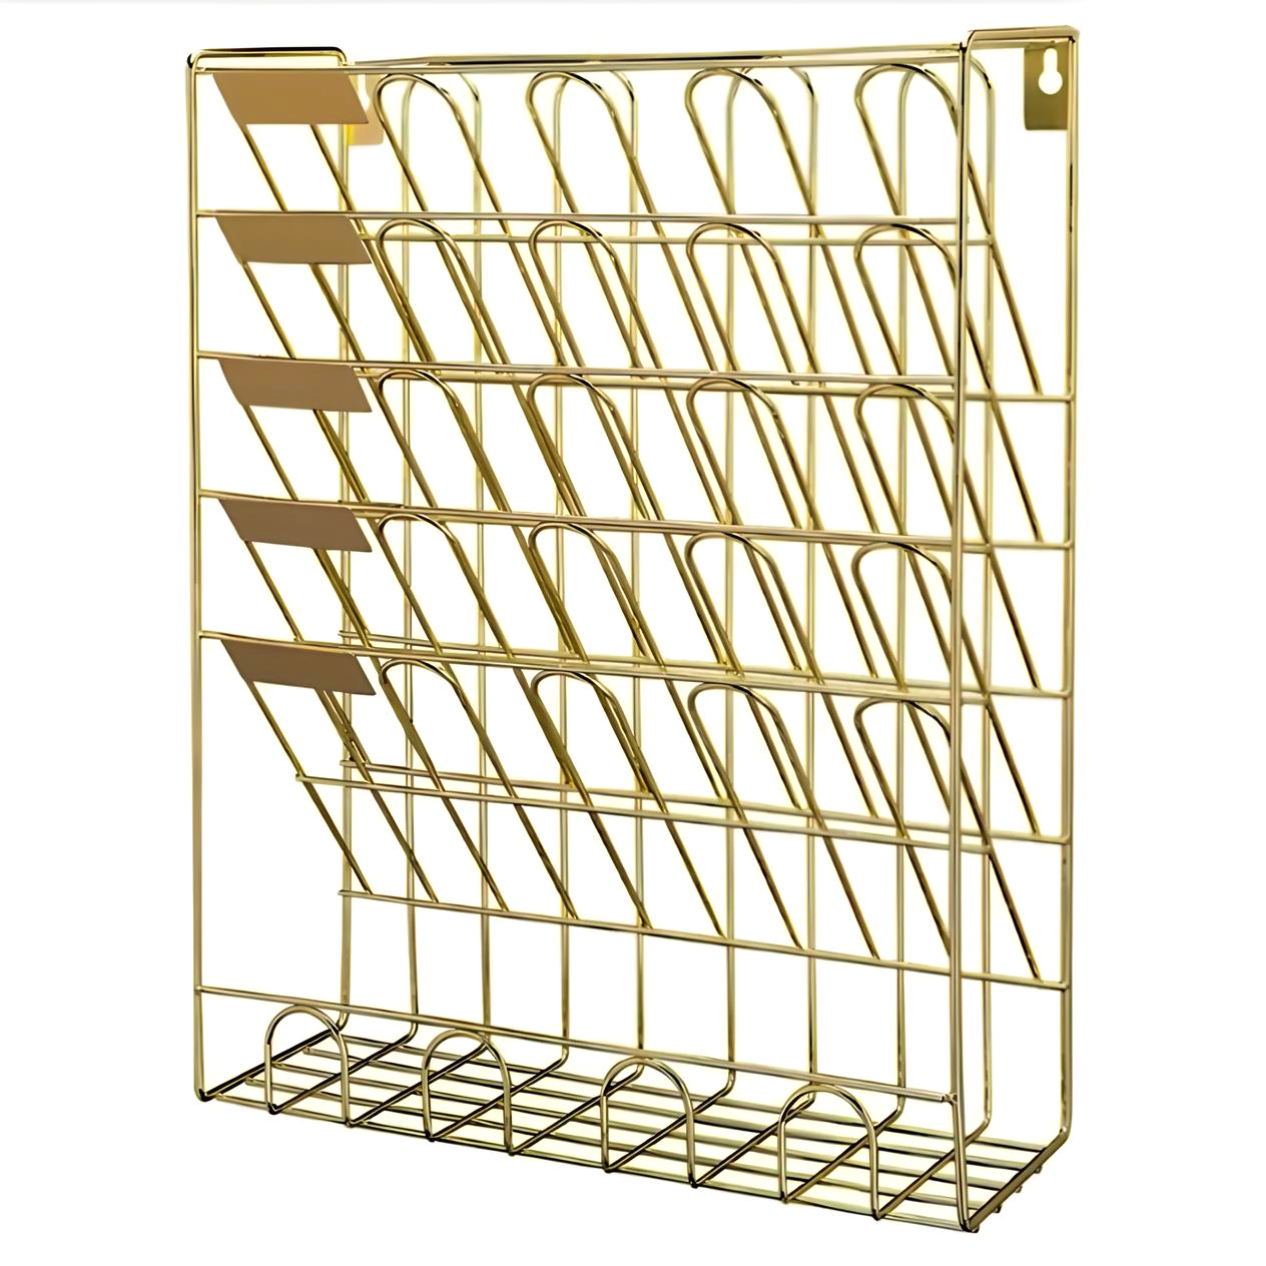 A gold wall file organizer on a white background.